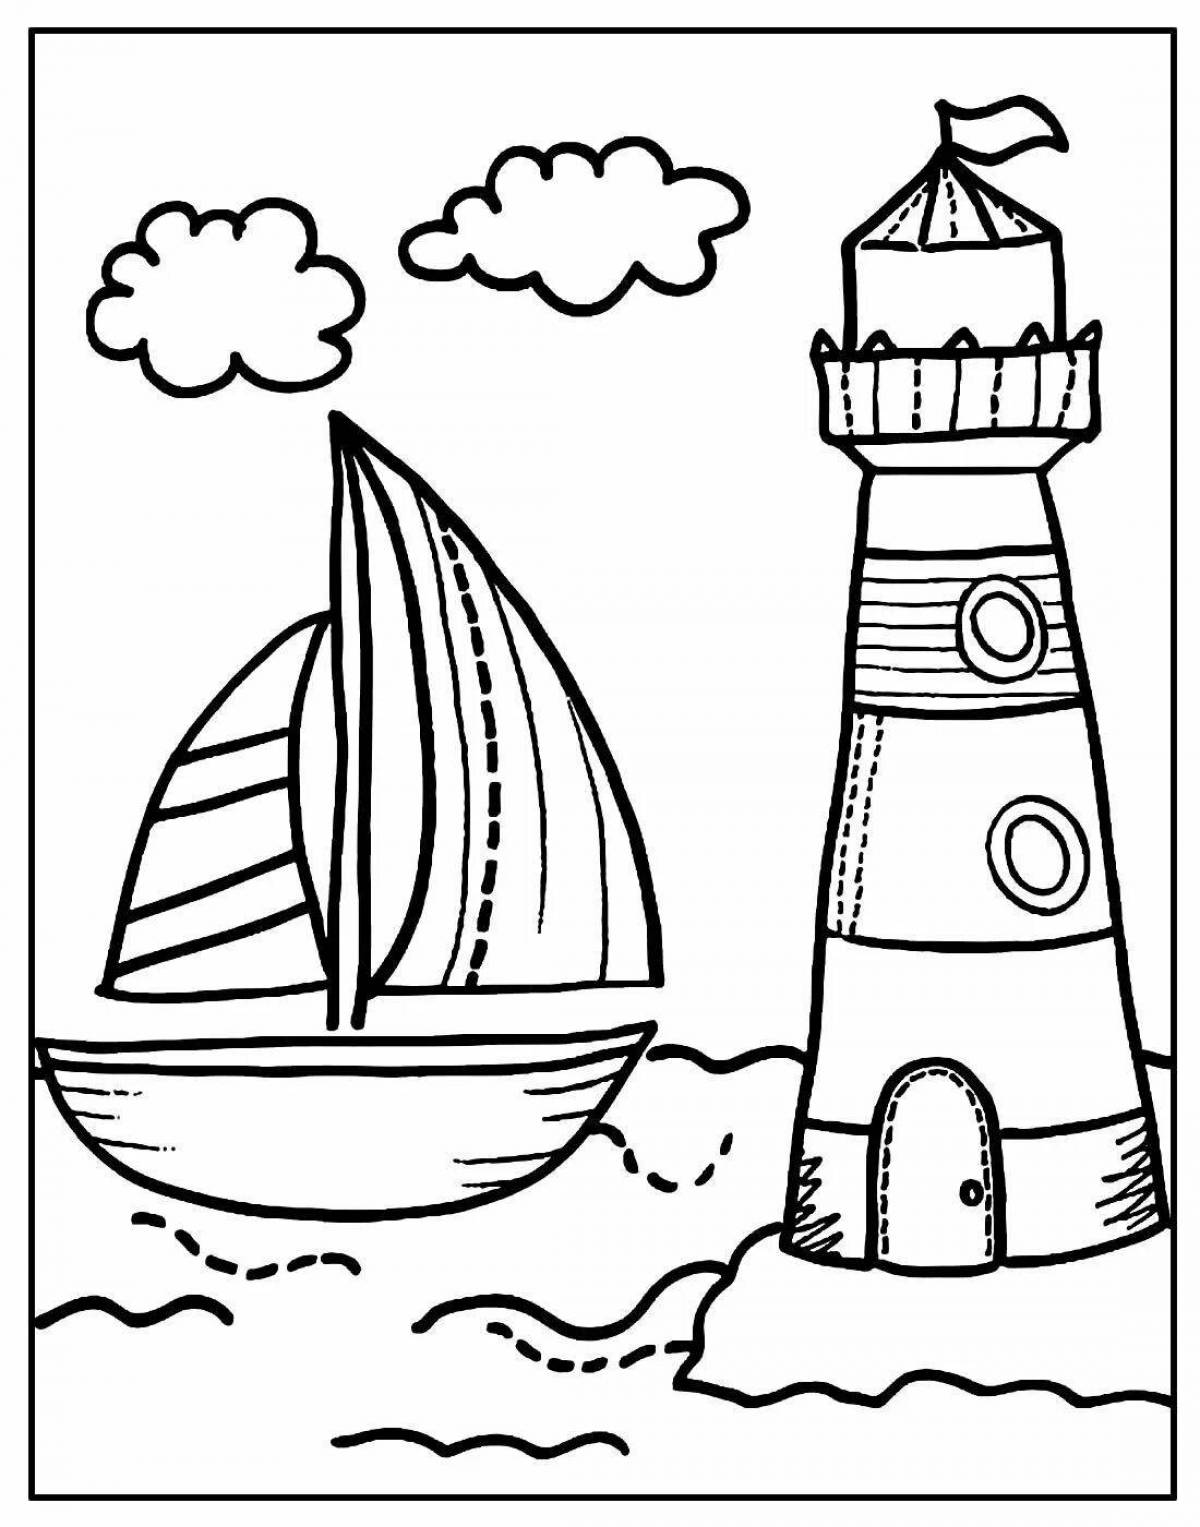 Adorable lighthouse coloring book for kids